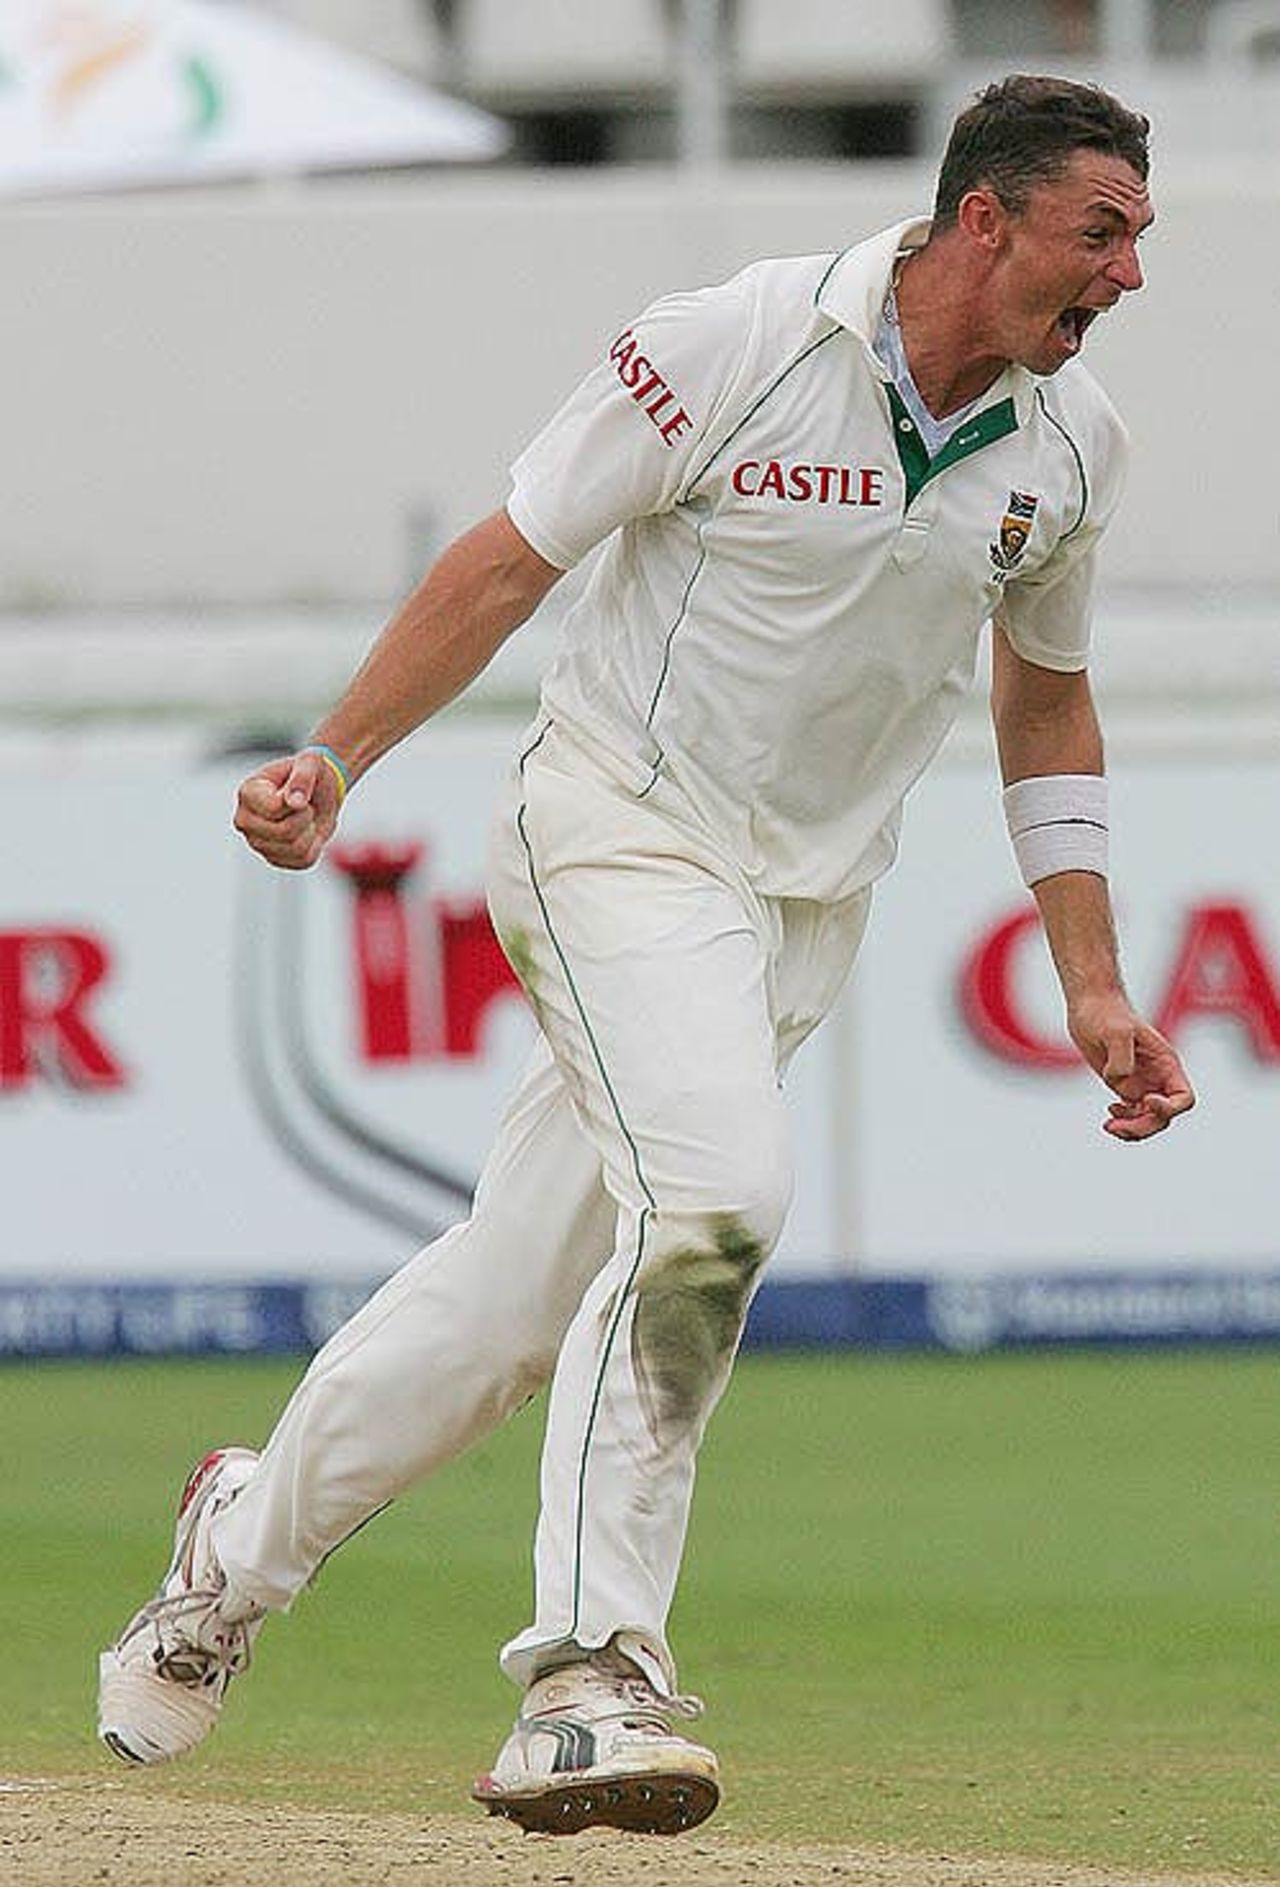 Andre Nel roars his delight after bowling VVS Laxman, South Africa v India, 2nd Test, Durban, 4th day, December 29, 2006